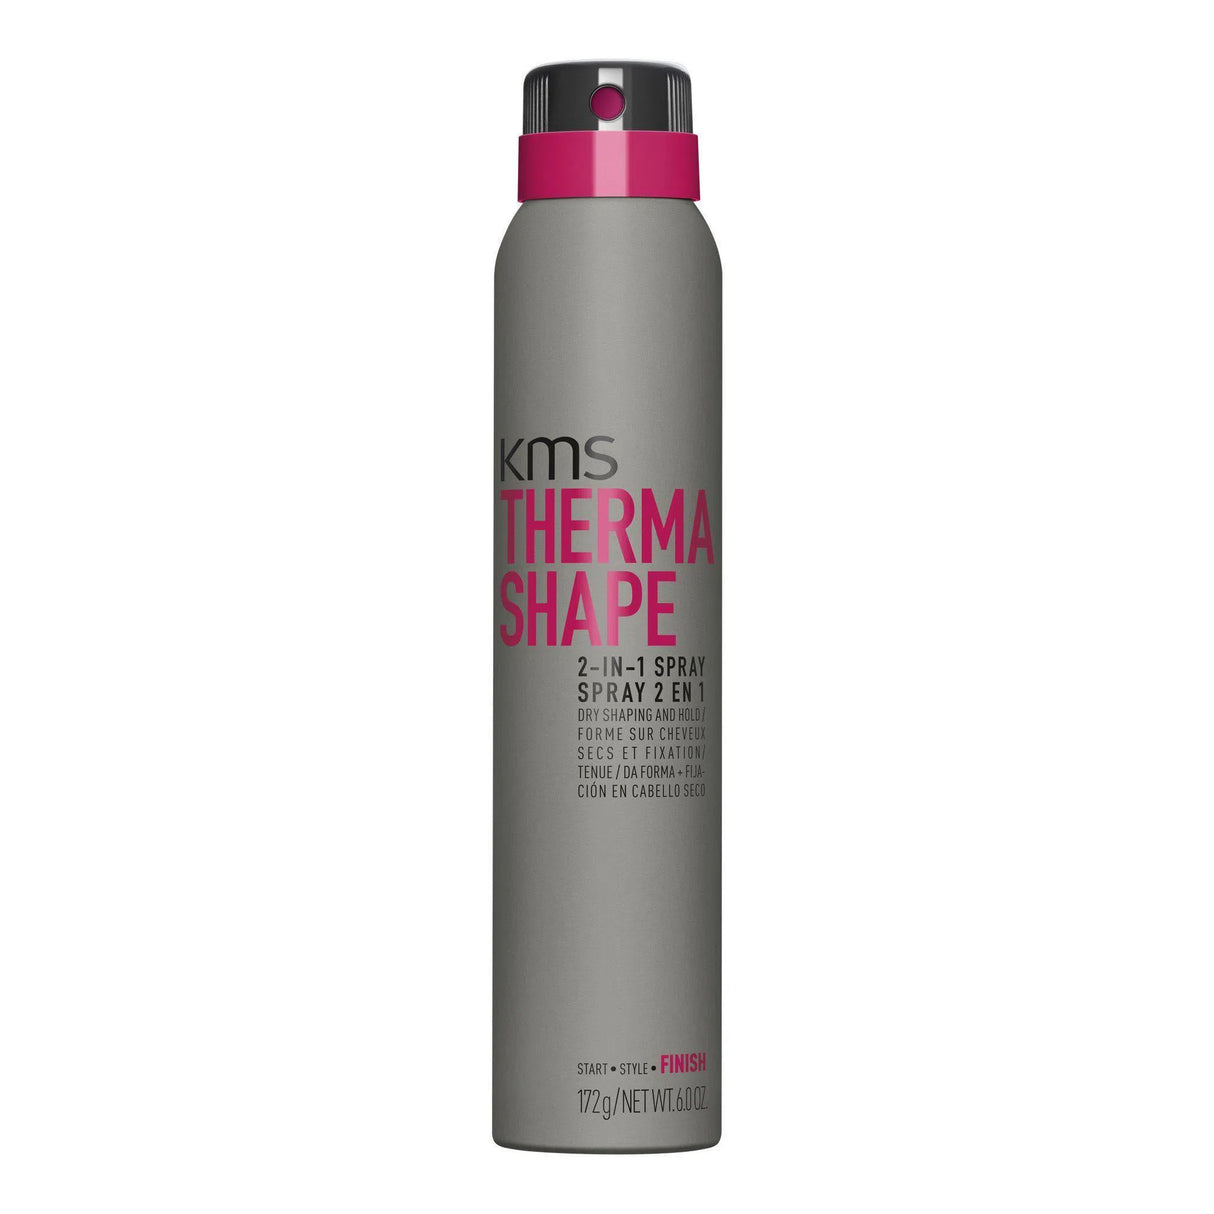 Thermashape 2-In-1 Spray